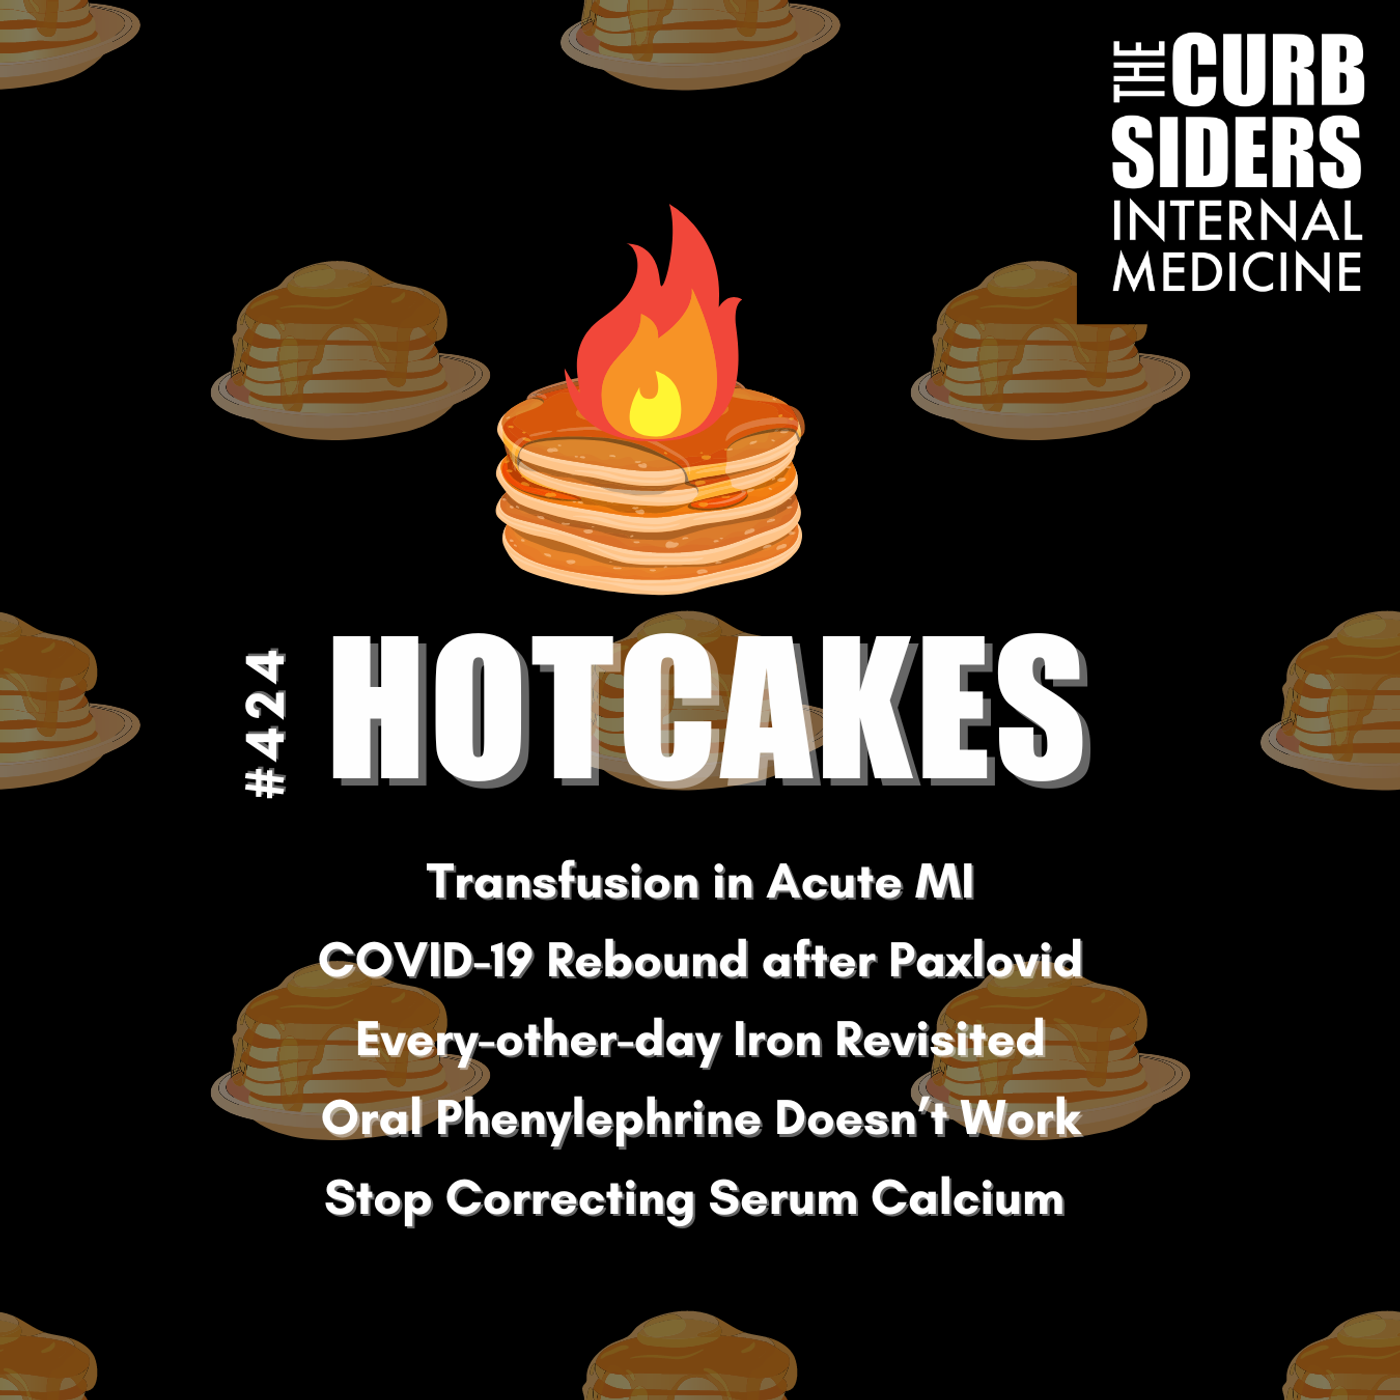 #424 Hotcakes: Transfusion in Acute MI, COVID-19 Rebound after Paxlovid, Every-other-day Iron Revisited, Oral Phenylephrine Doesn’t Work, and Stop Correcting Serum Calcium